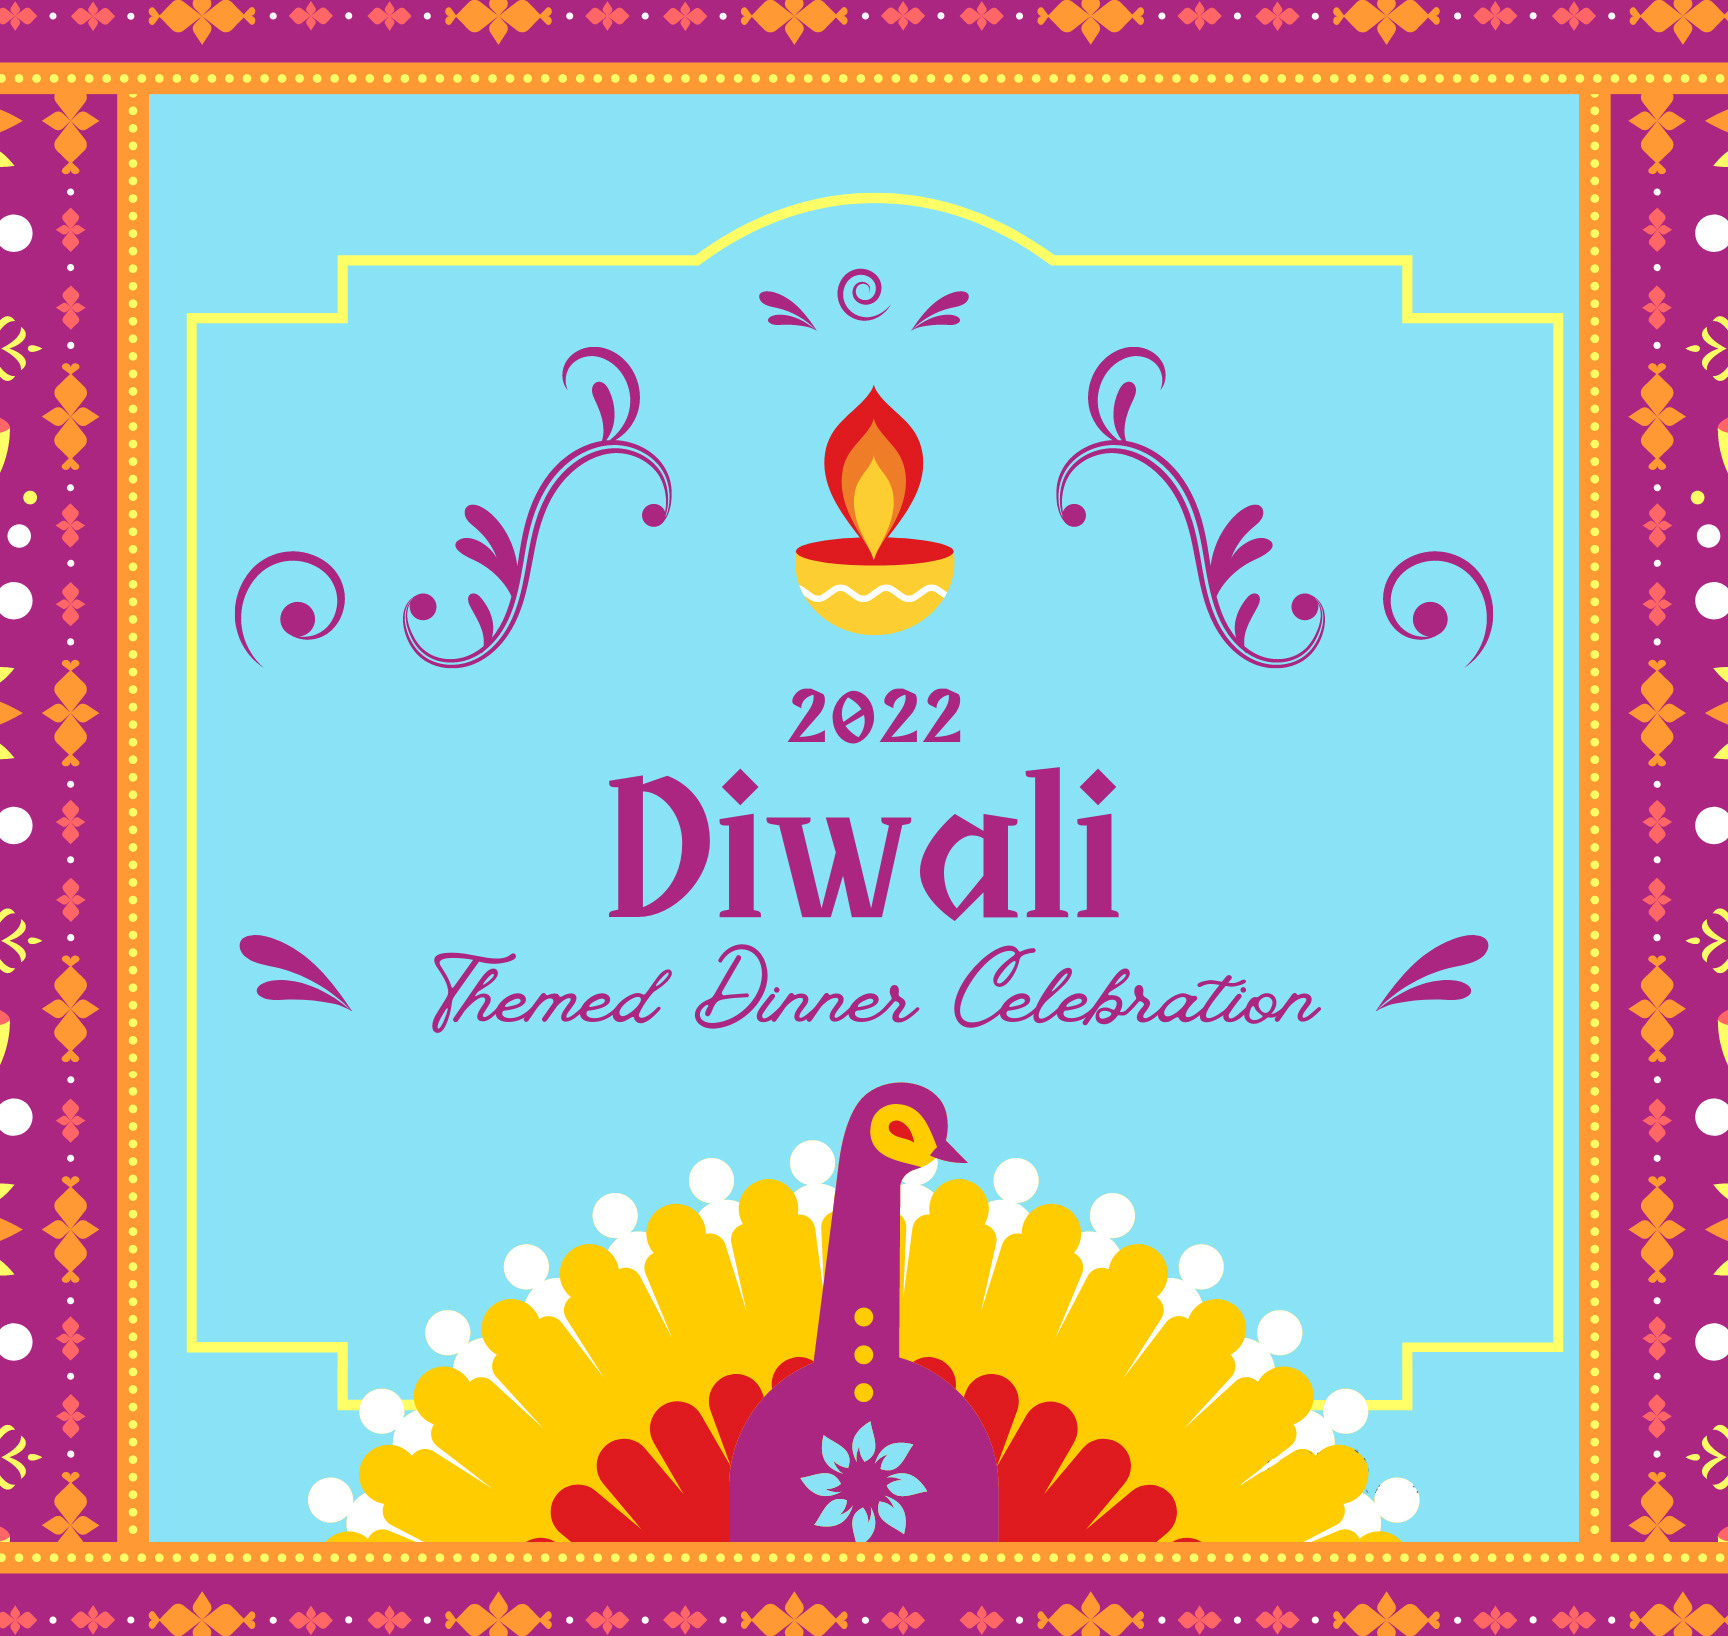 2022 Diwali Themed Dinner Celebration poster featuring bright purple, blue, orange, and yellow colors and patterns with peacock illustration centered at bottom